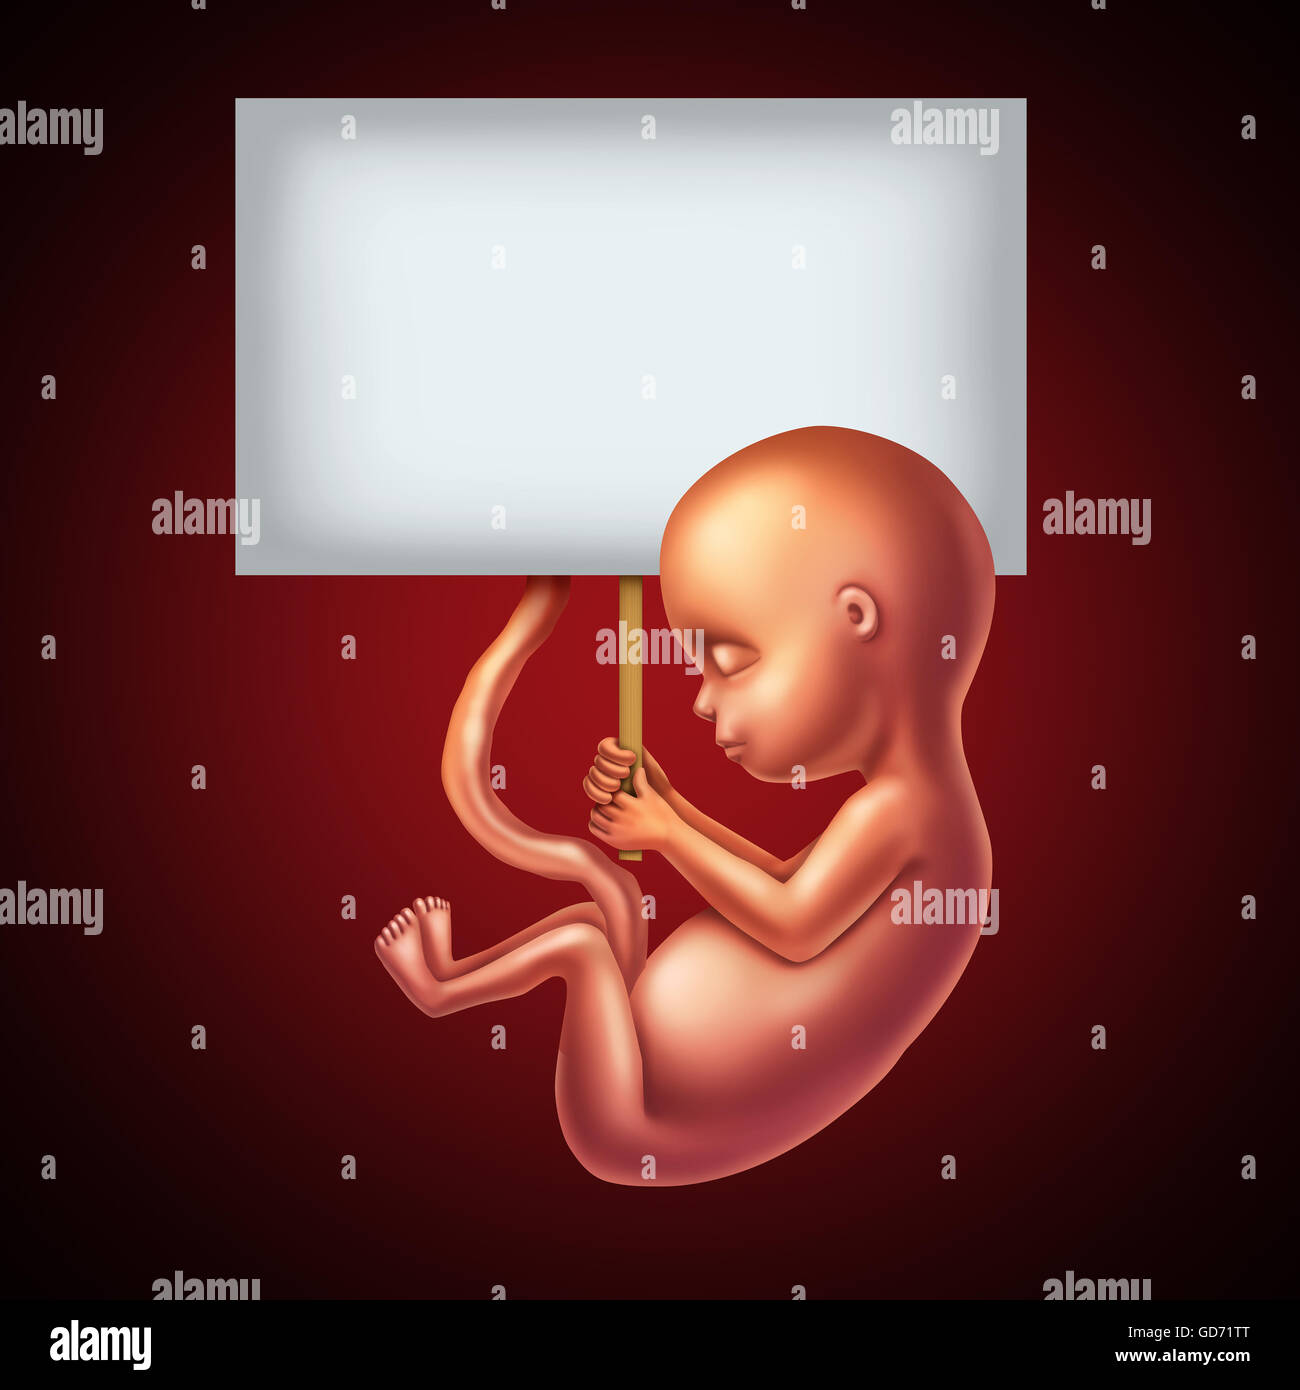 Unborn baby or prenatal screening message and obstetrics and gynecology communication symbol as a fetus holding a blank sign as Stock Photo